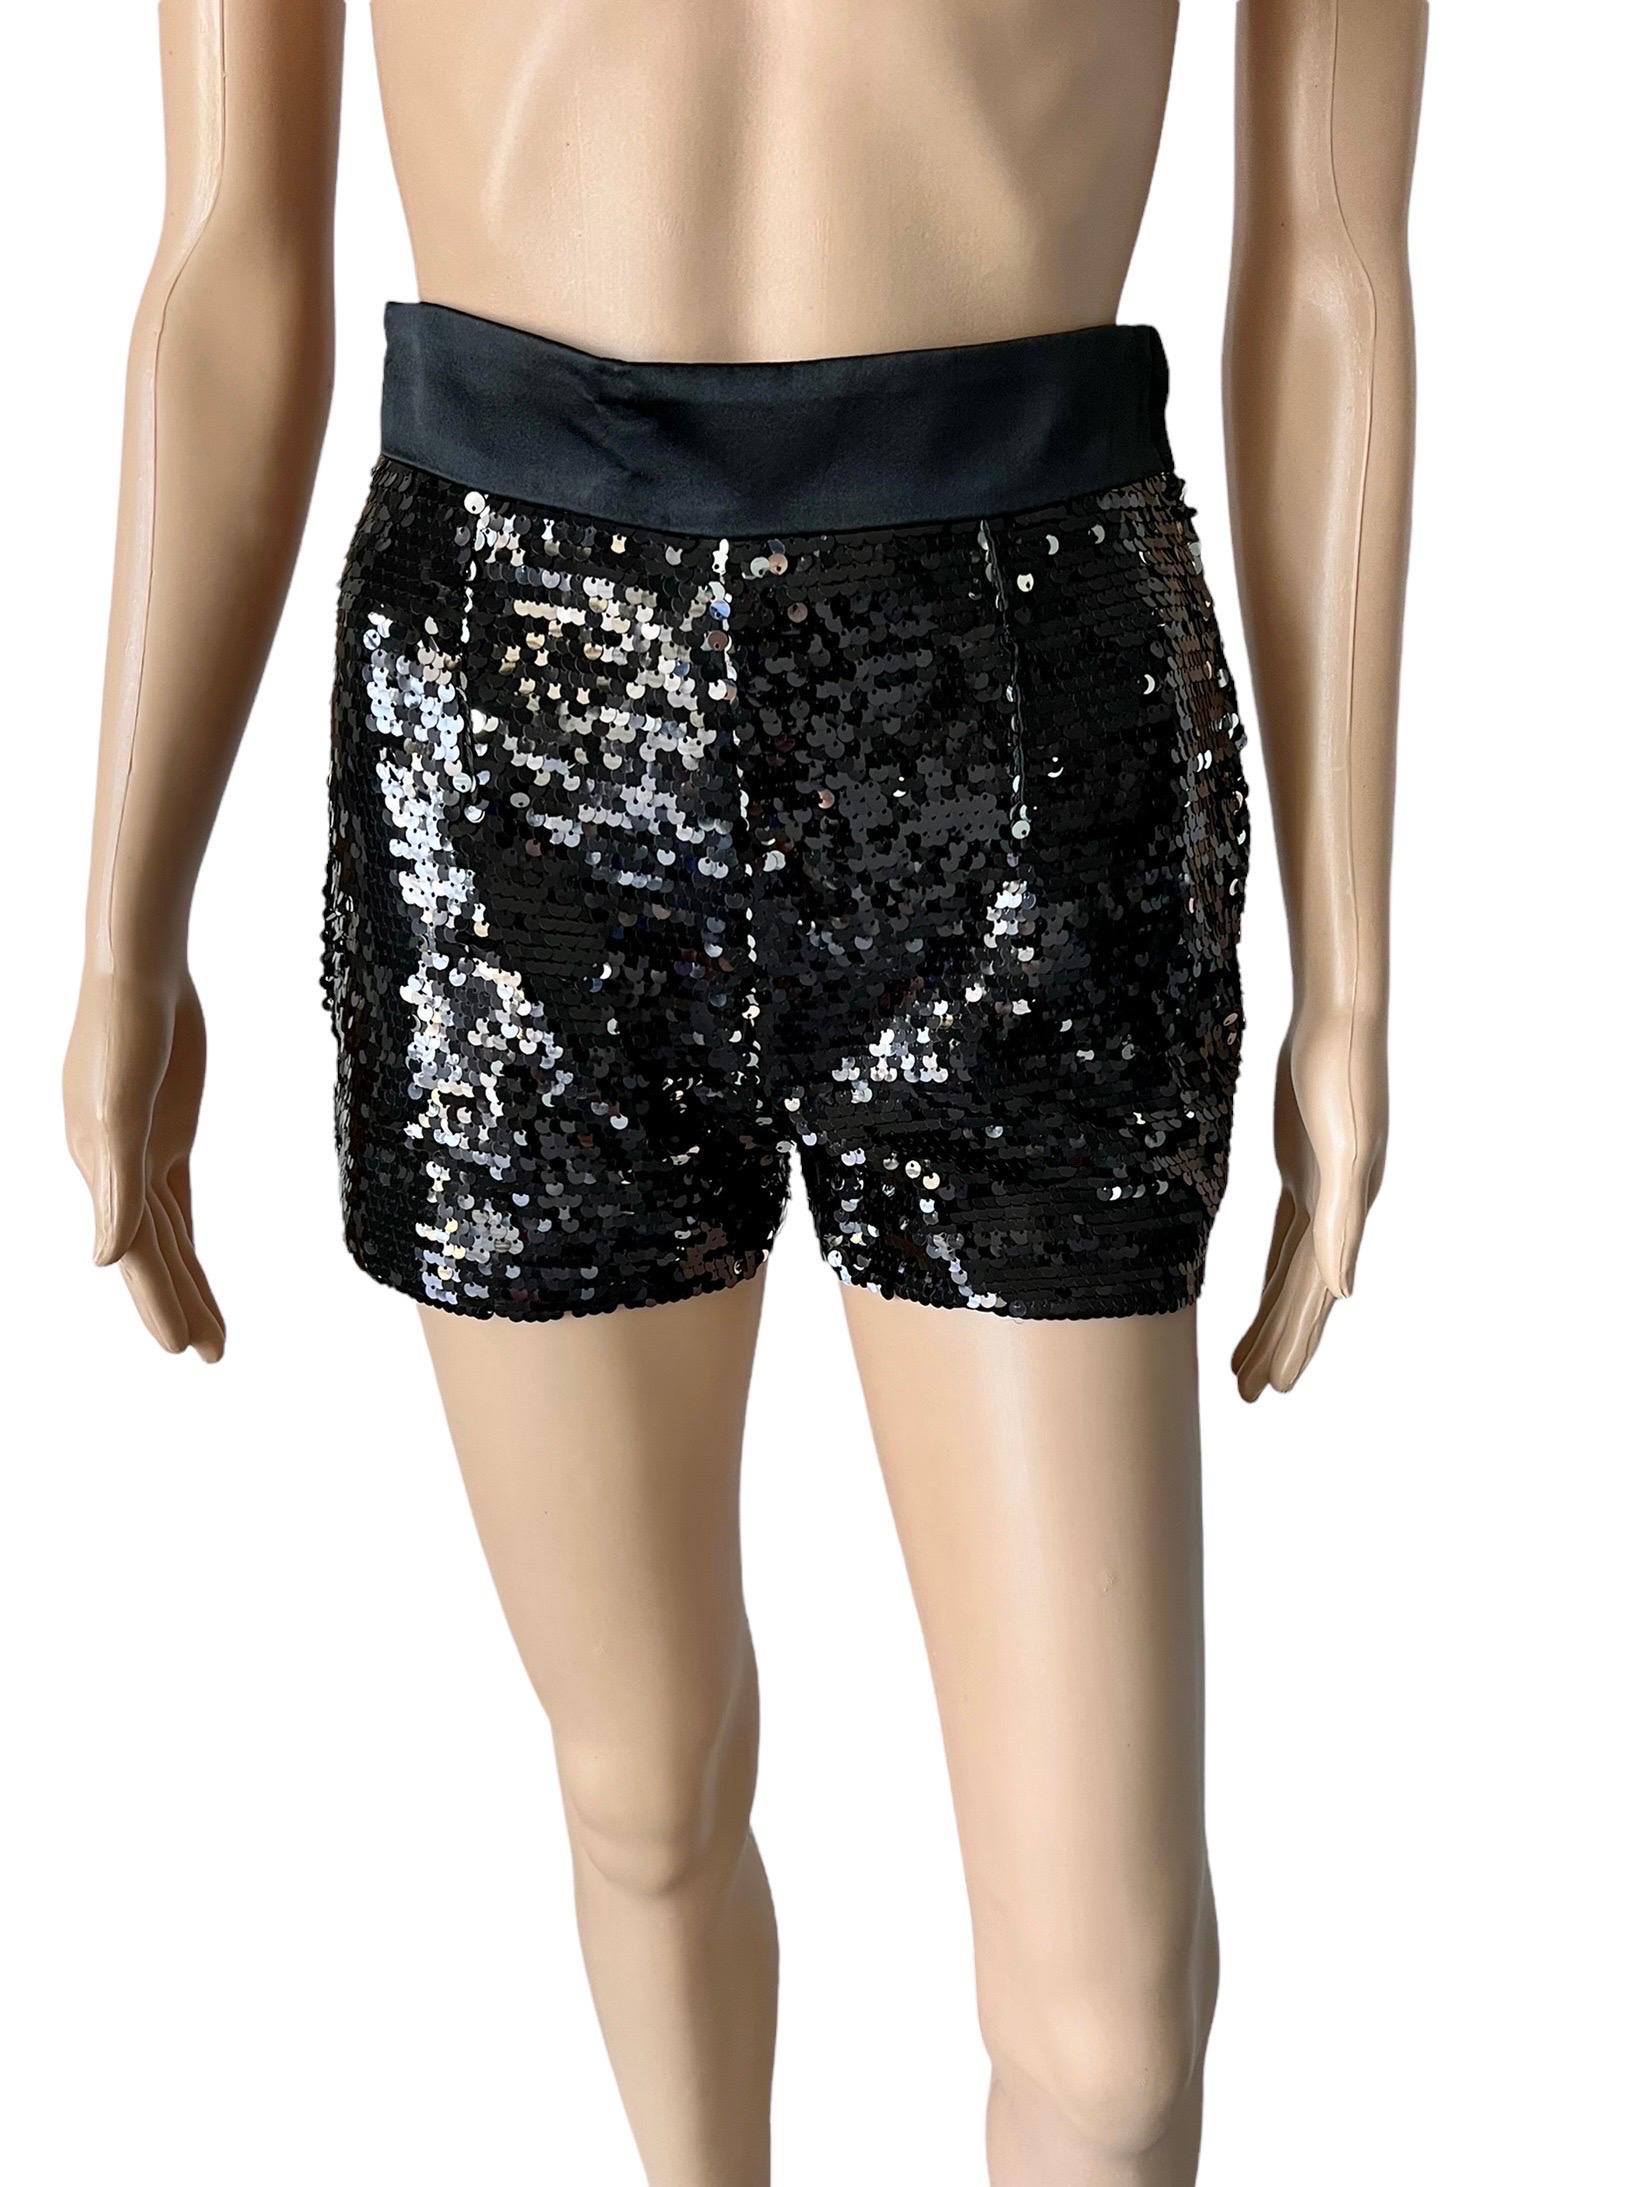 Dolce & Gabbana F/W 2011 Unworn Sequin Embellished Black Hot Pants Mini Shorts  In New Condition For Sale In Naples, FL